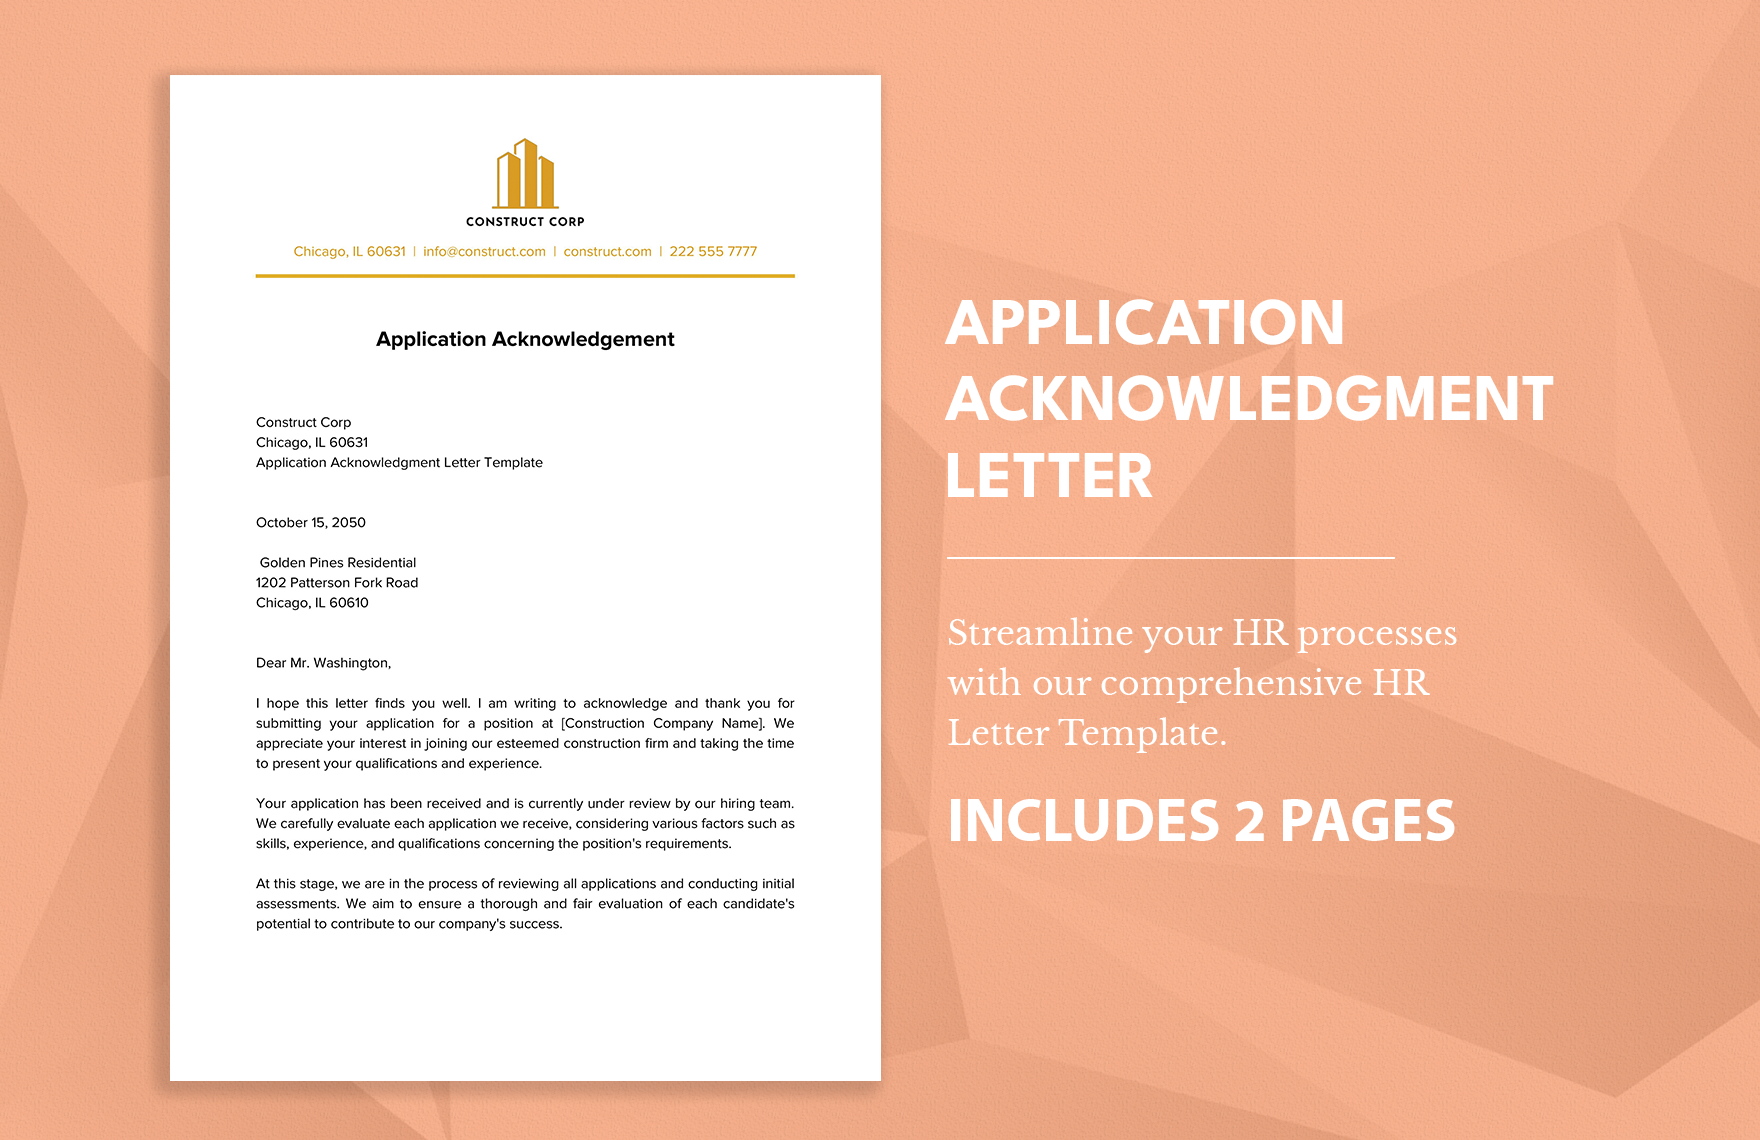 Application Acknowledgment Letter Template in Word, Google Docs